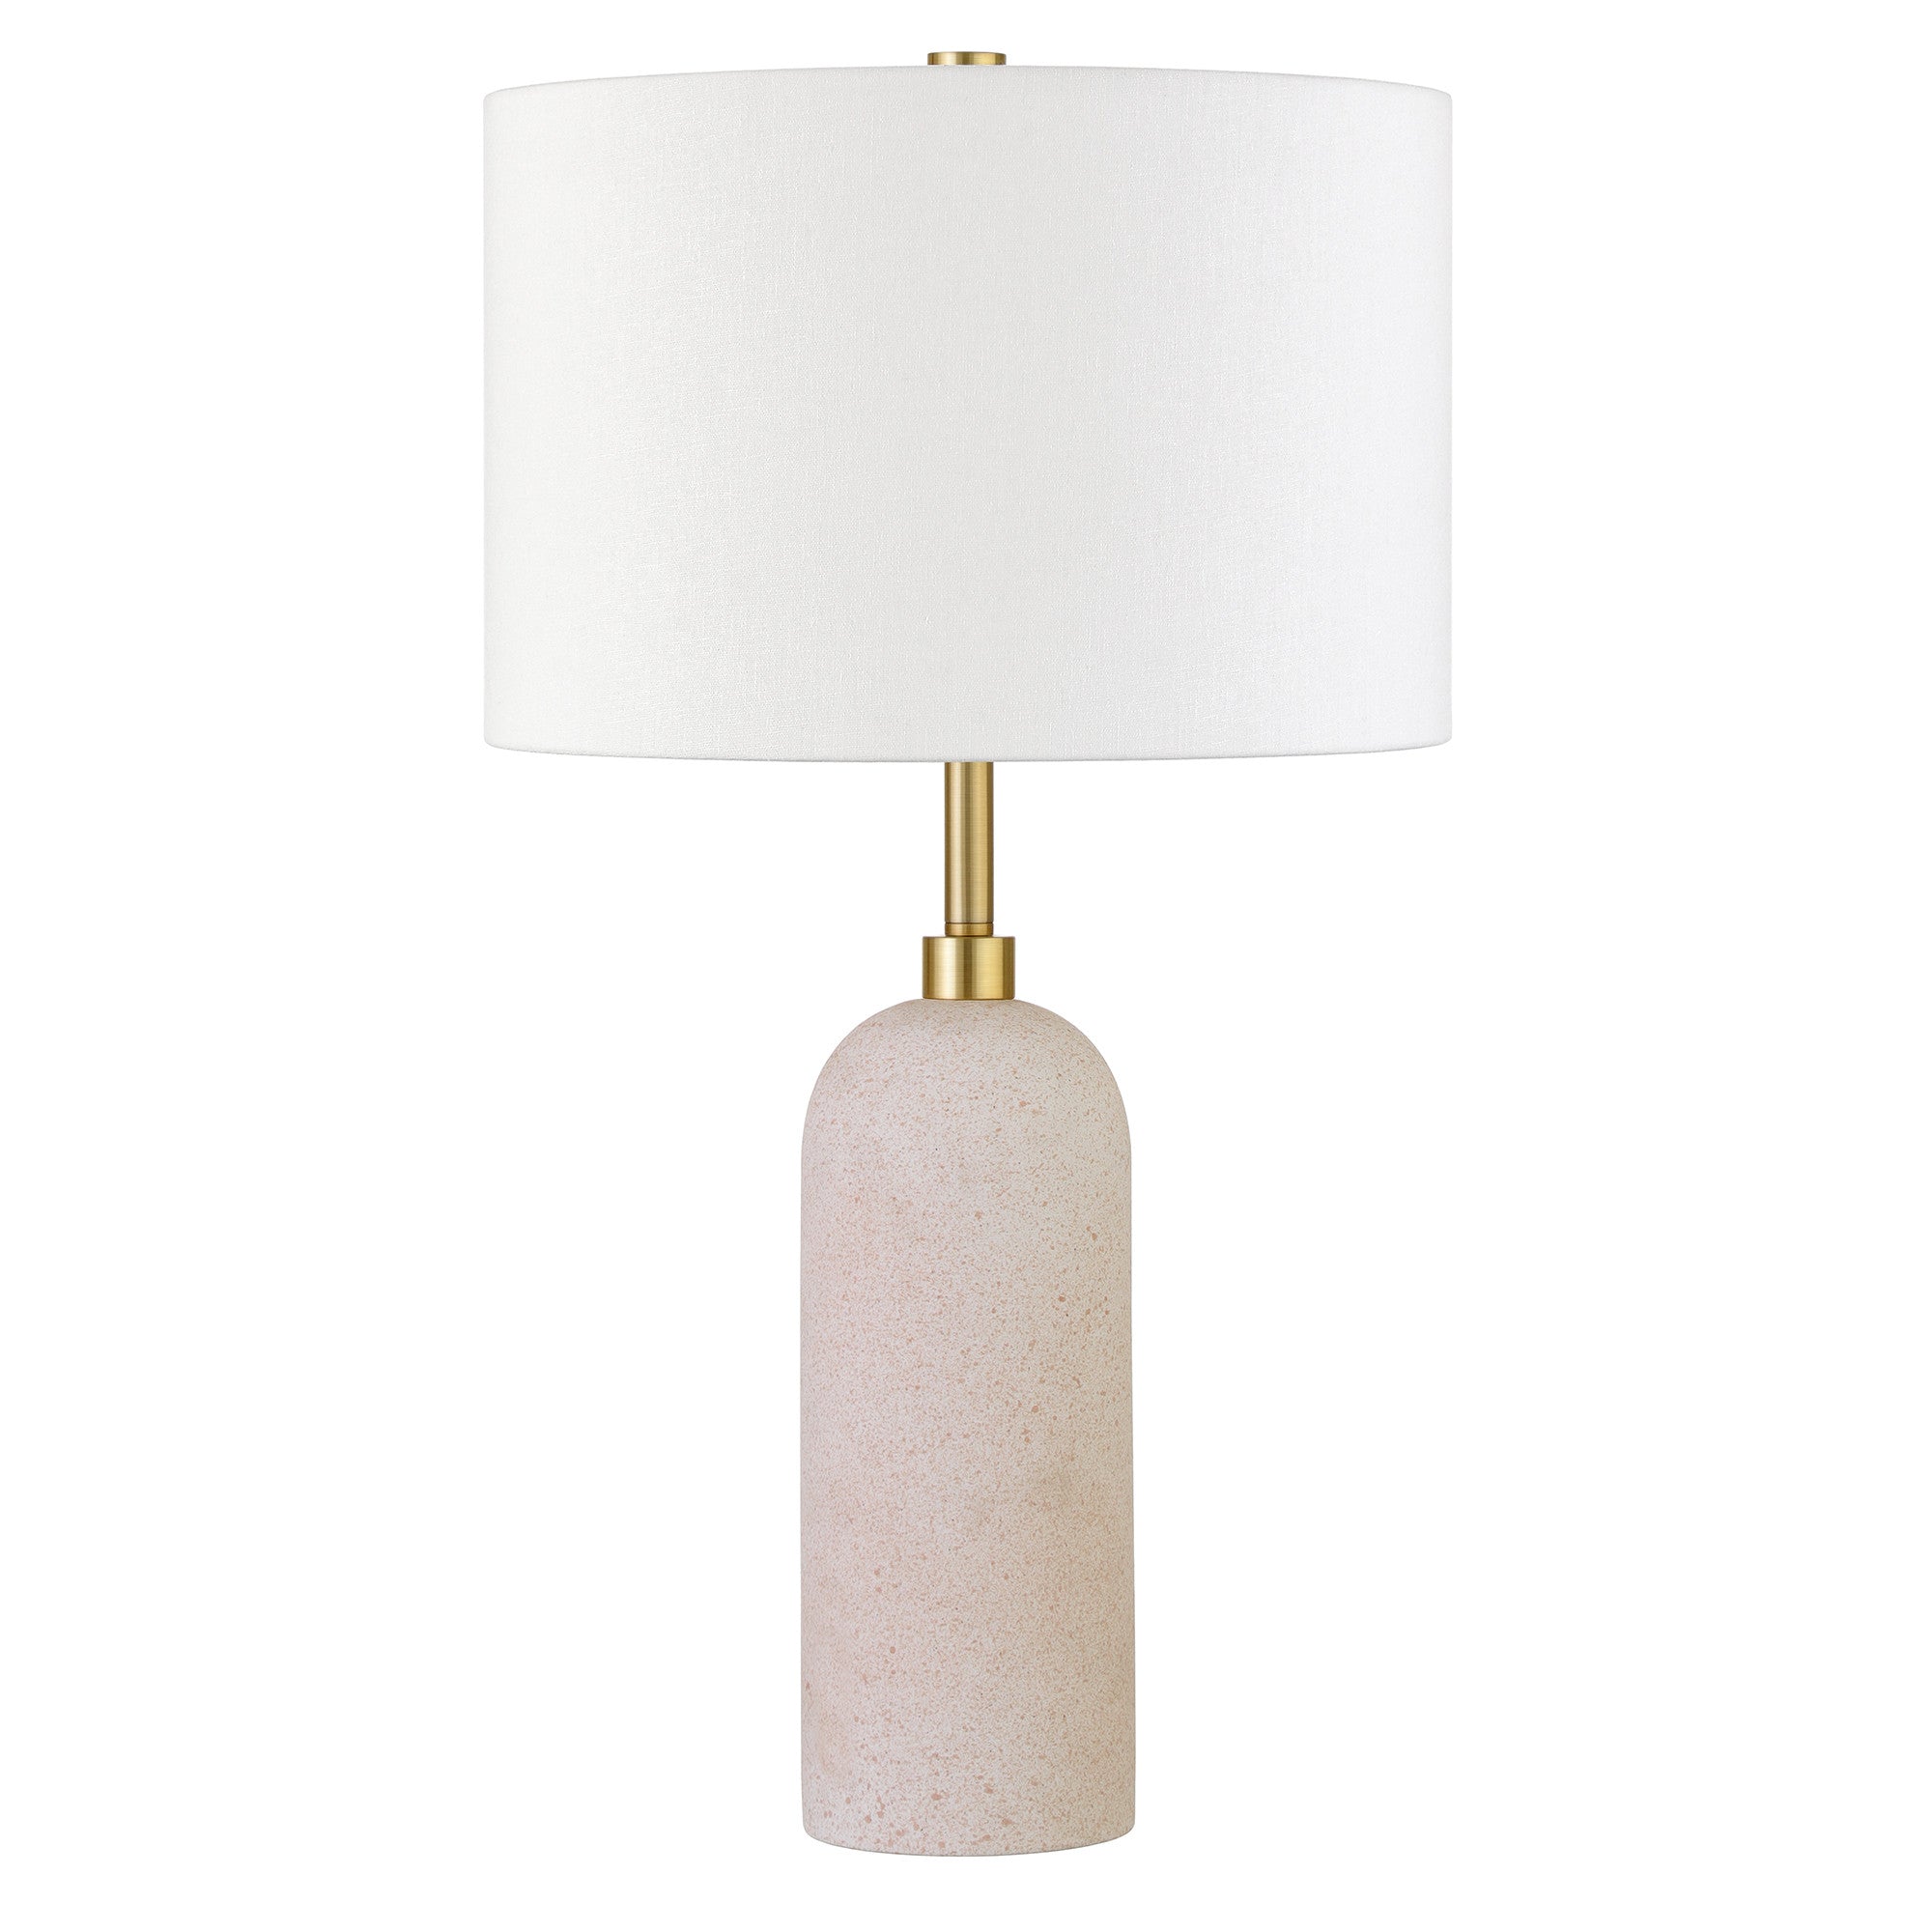 22" Sand Ceramic Table Lamp With White Drum Shade